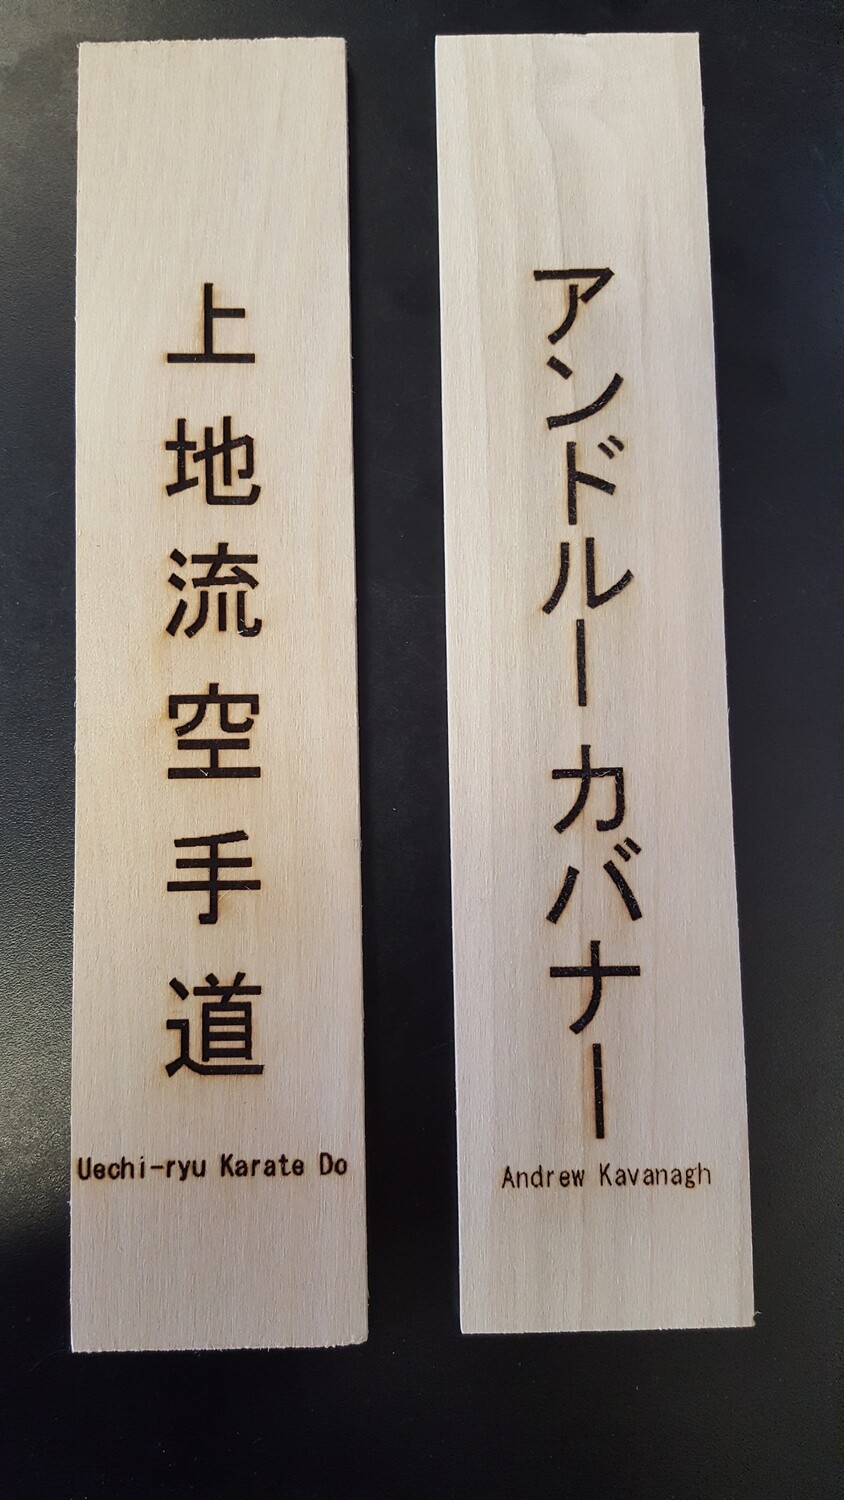 Japanese Name and Style Plates